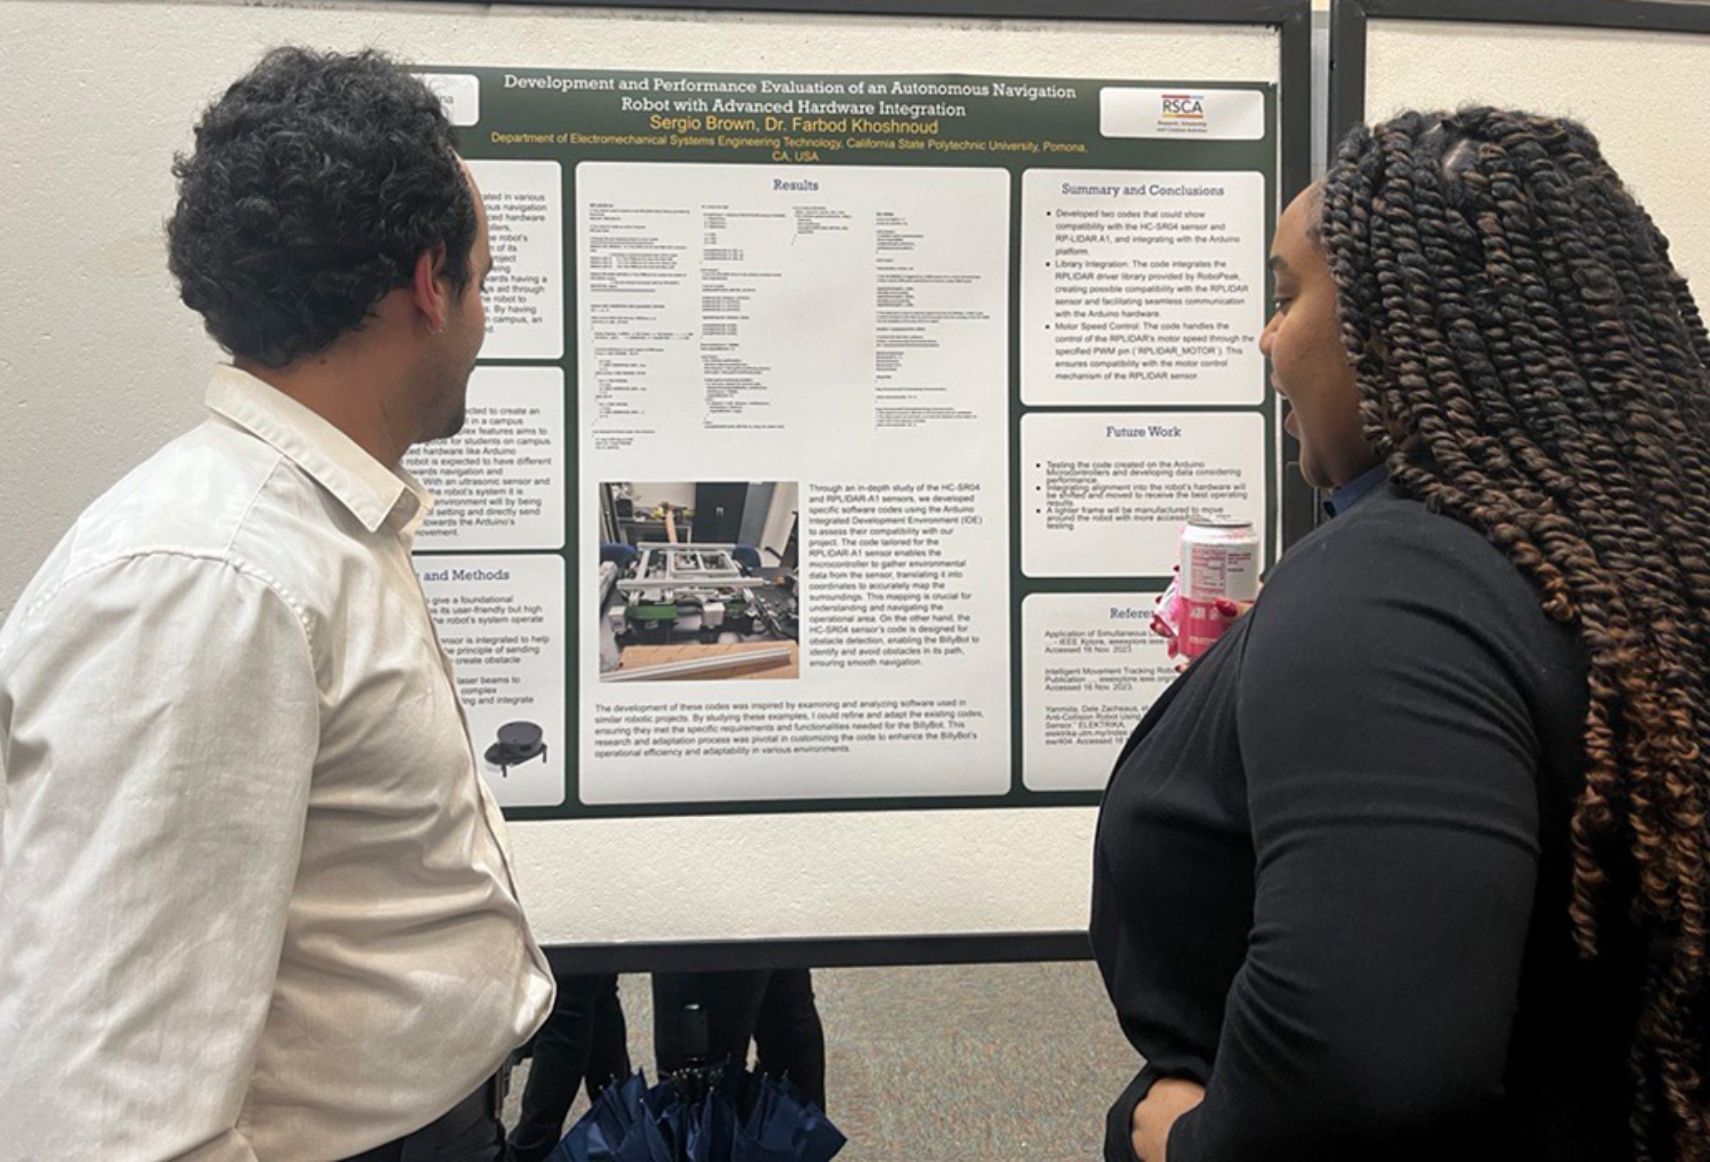 Two people are examining a research poster on autonomous navigation robots by Sergio Brown at Cal Poly Pomona. The left-side person in a white shirt is partially visible, while the right-side person with braided hair faces the poster, which includes text and images detailing the project.